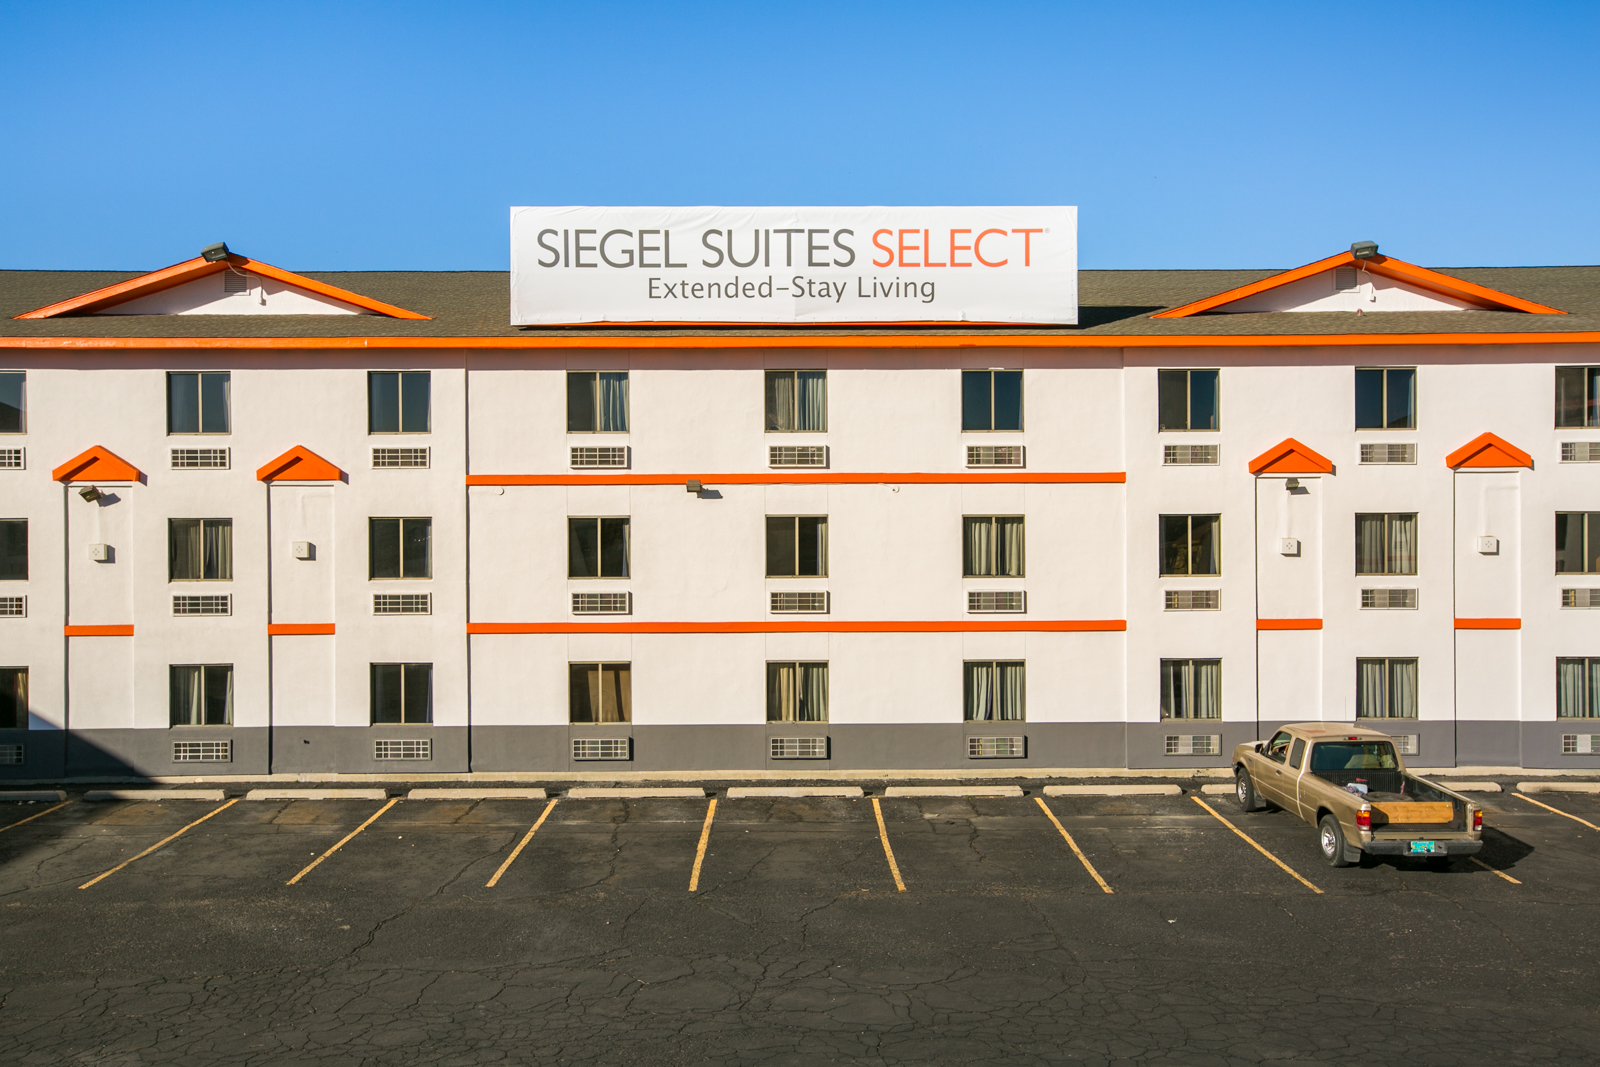 Siegel Suites Select Albuquerque Book Your Stay Today! Siegel Select